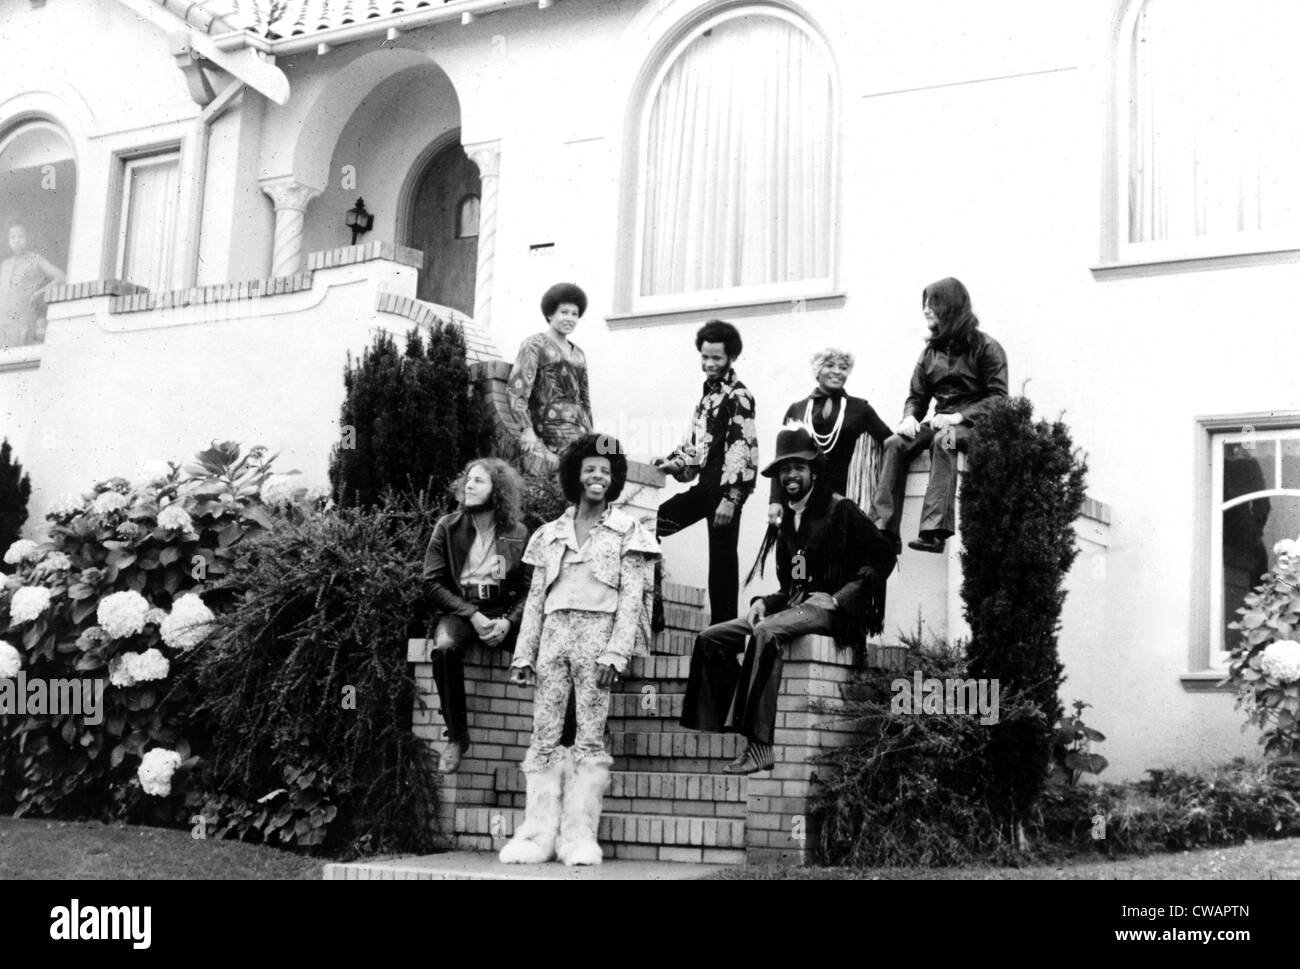 SLY AND THE FAMILY STONE, c. 1970.. Courtesy: CSU Archives / Everett Collection Stock Photo